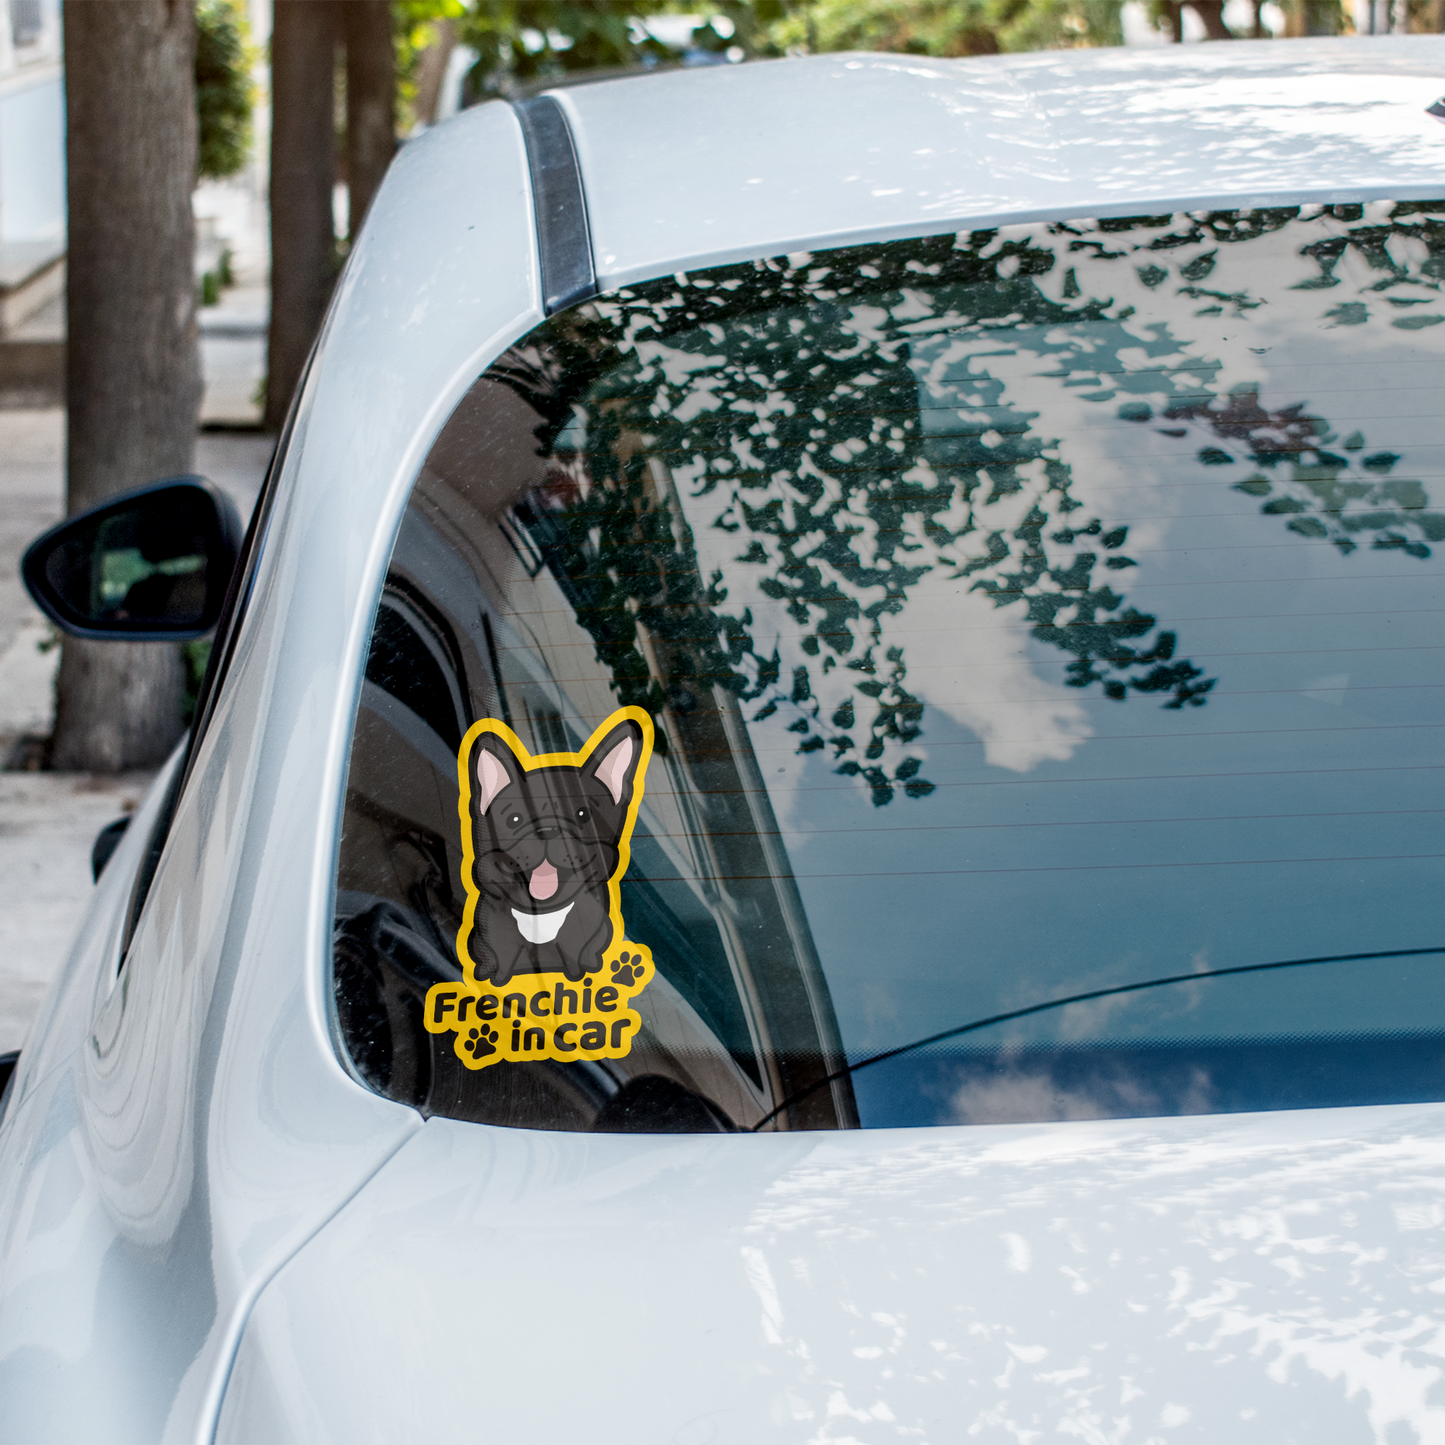 Frenchie Car Sticker, Frenchie Cute Dog Vinyl Sticker, Sticks On The Inside Facing Out